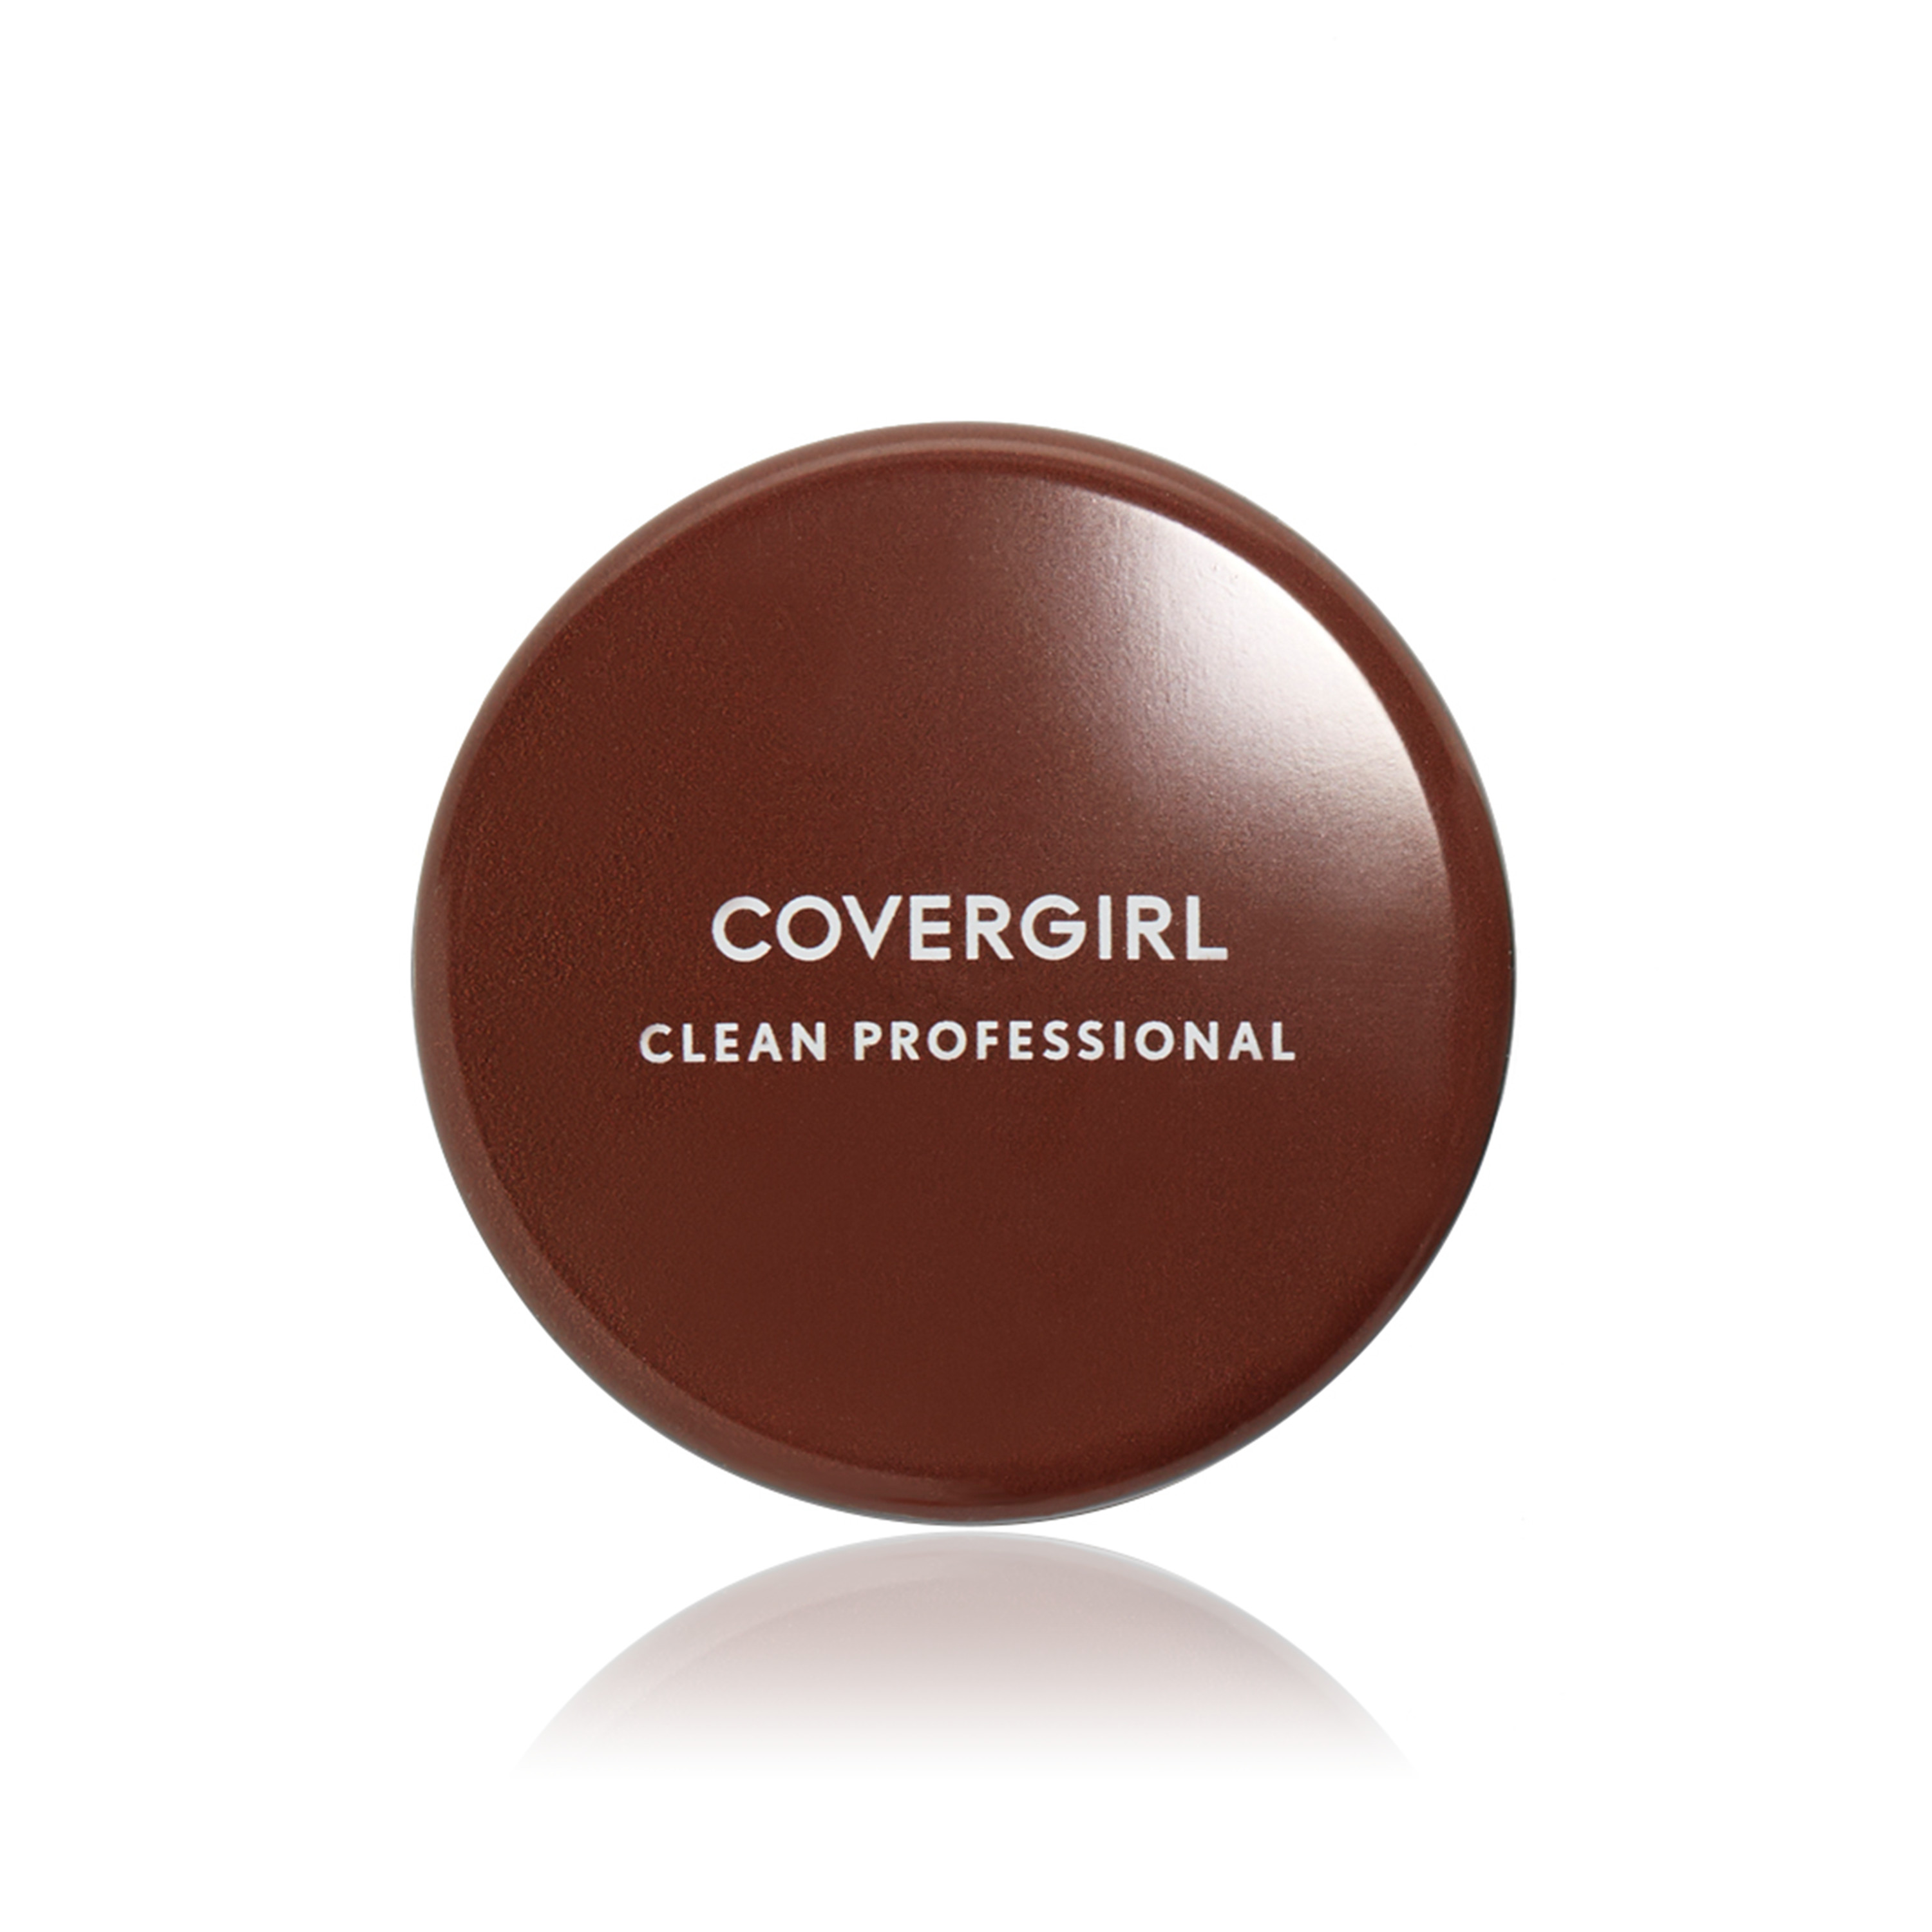 COVERGIRL Clean Professional Loose Powder, 110 Translucent Light, 0.70 oz - image 2 of 3